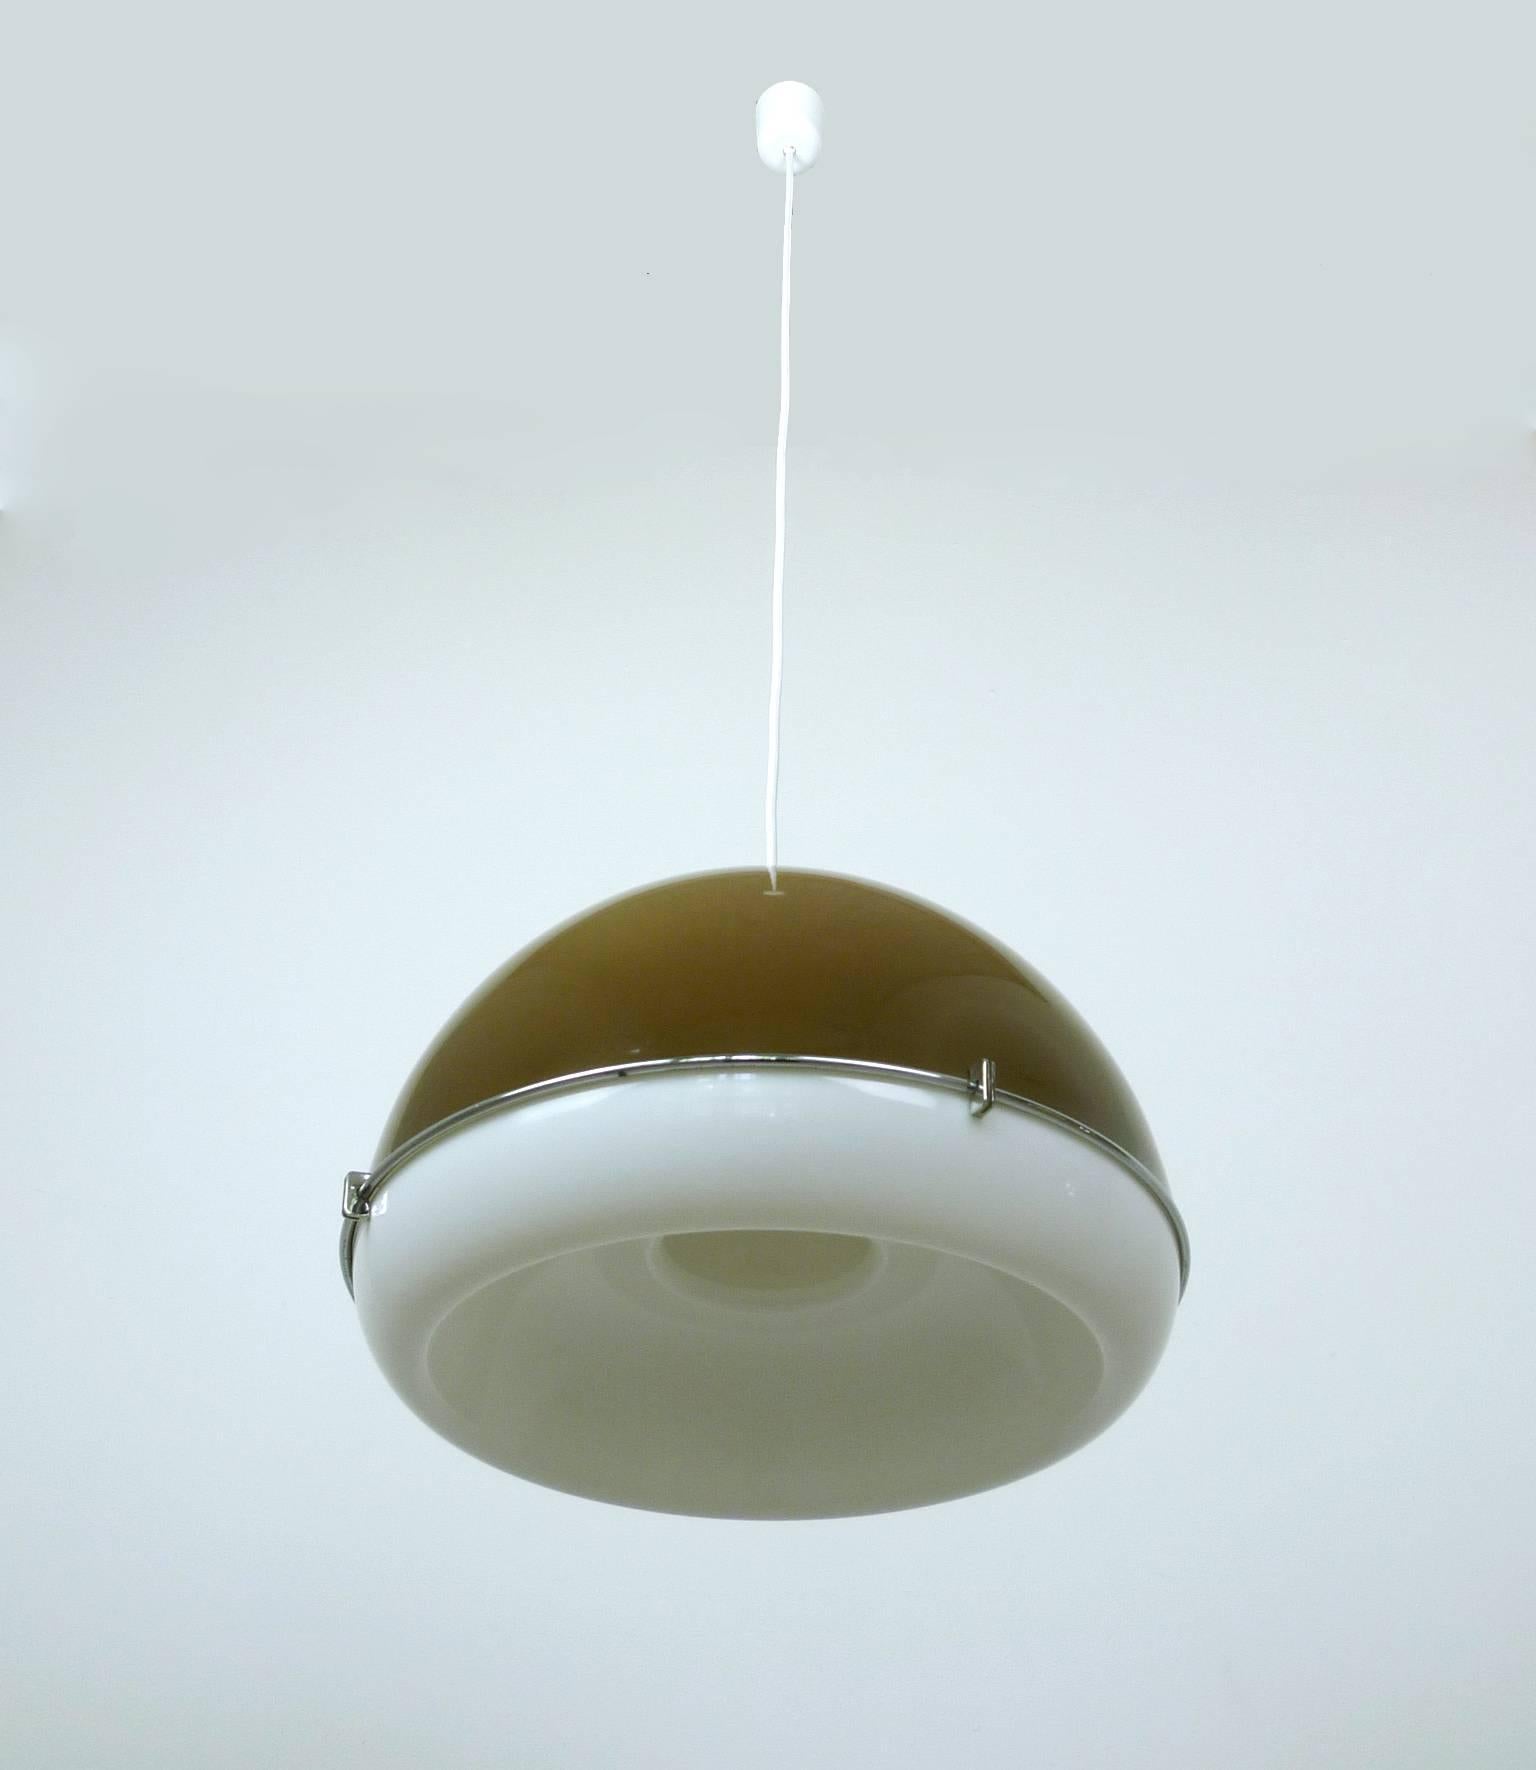 Space Age Ceiling Light with Bi-Colored Plastic Shade from Germany, 1970s